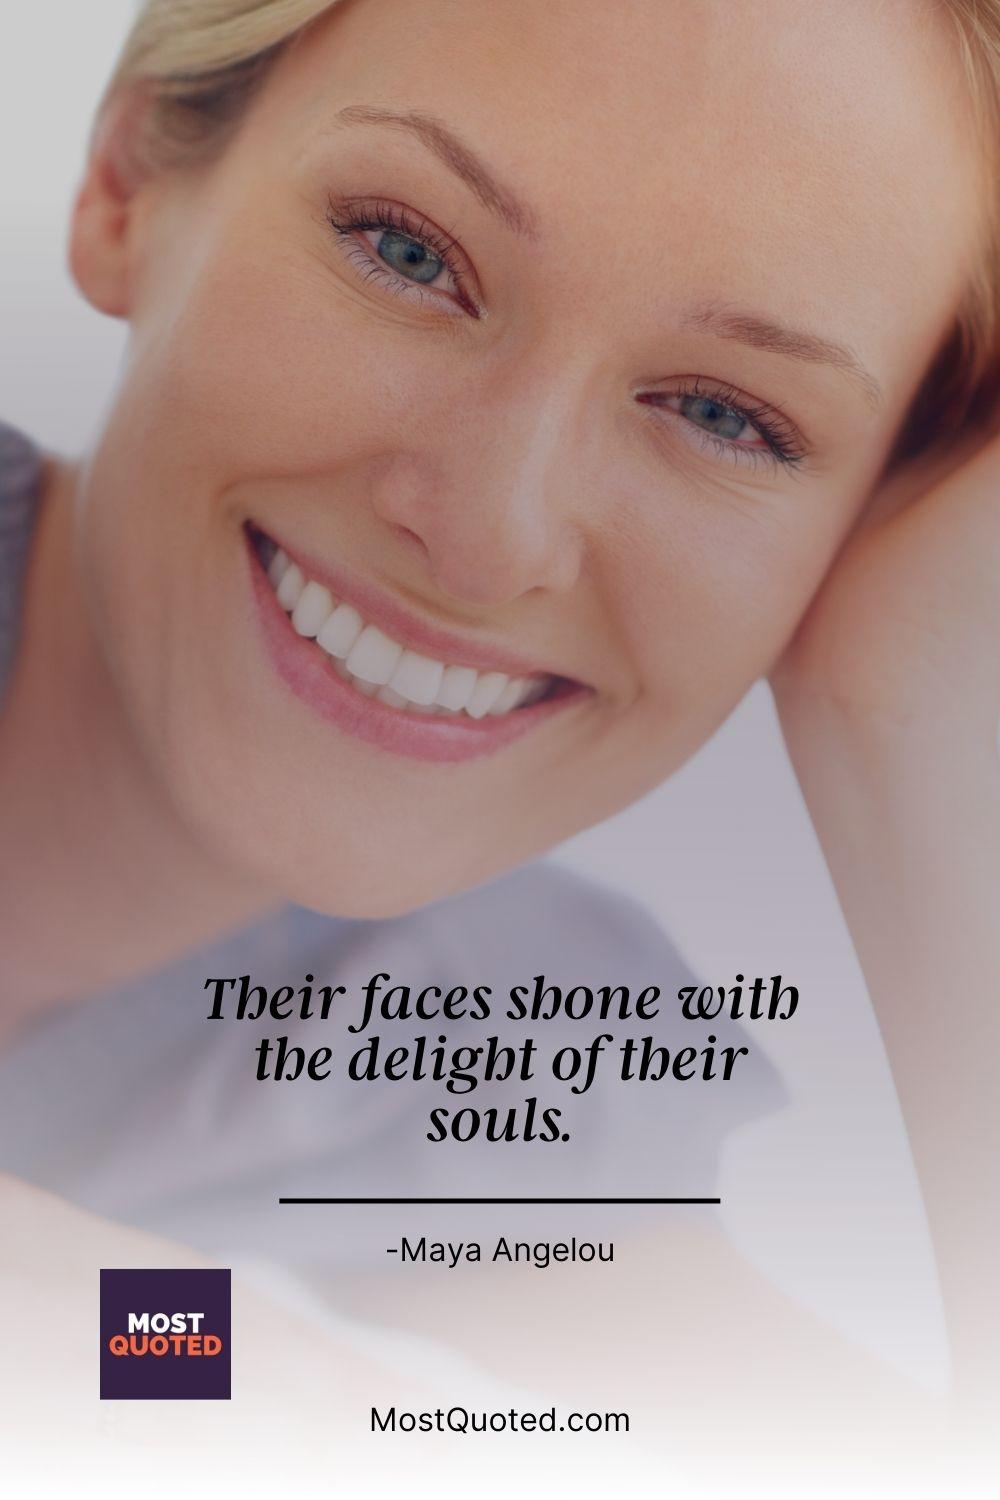 Their faces shone with the delight of their souls. - Maya Angelou